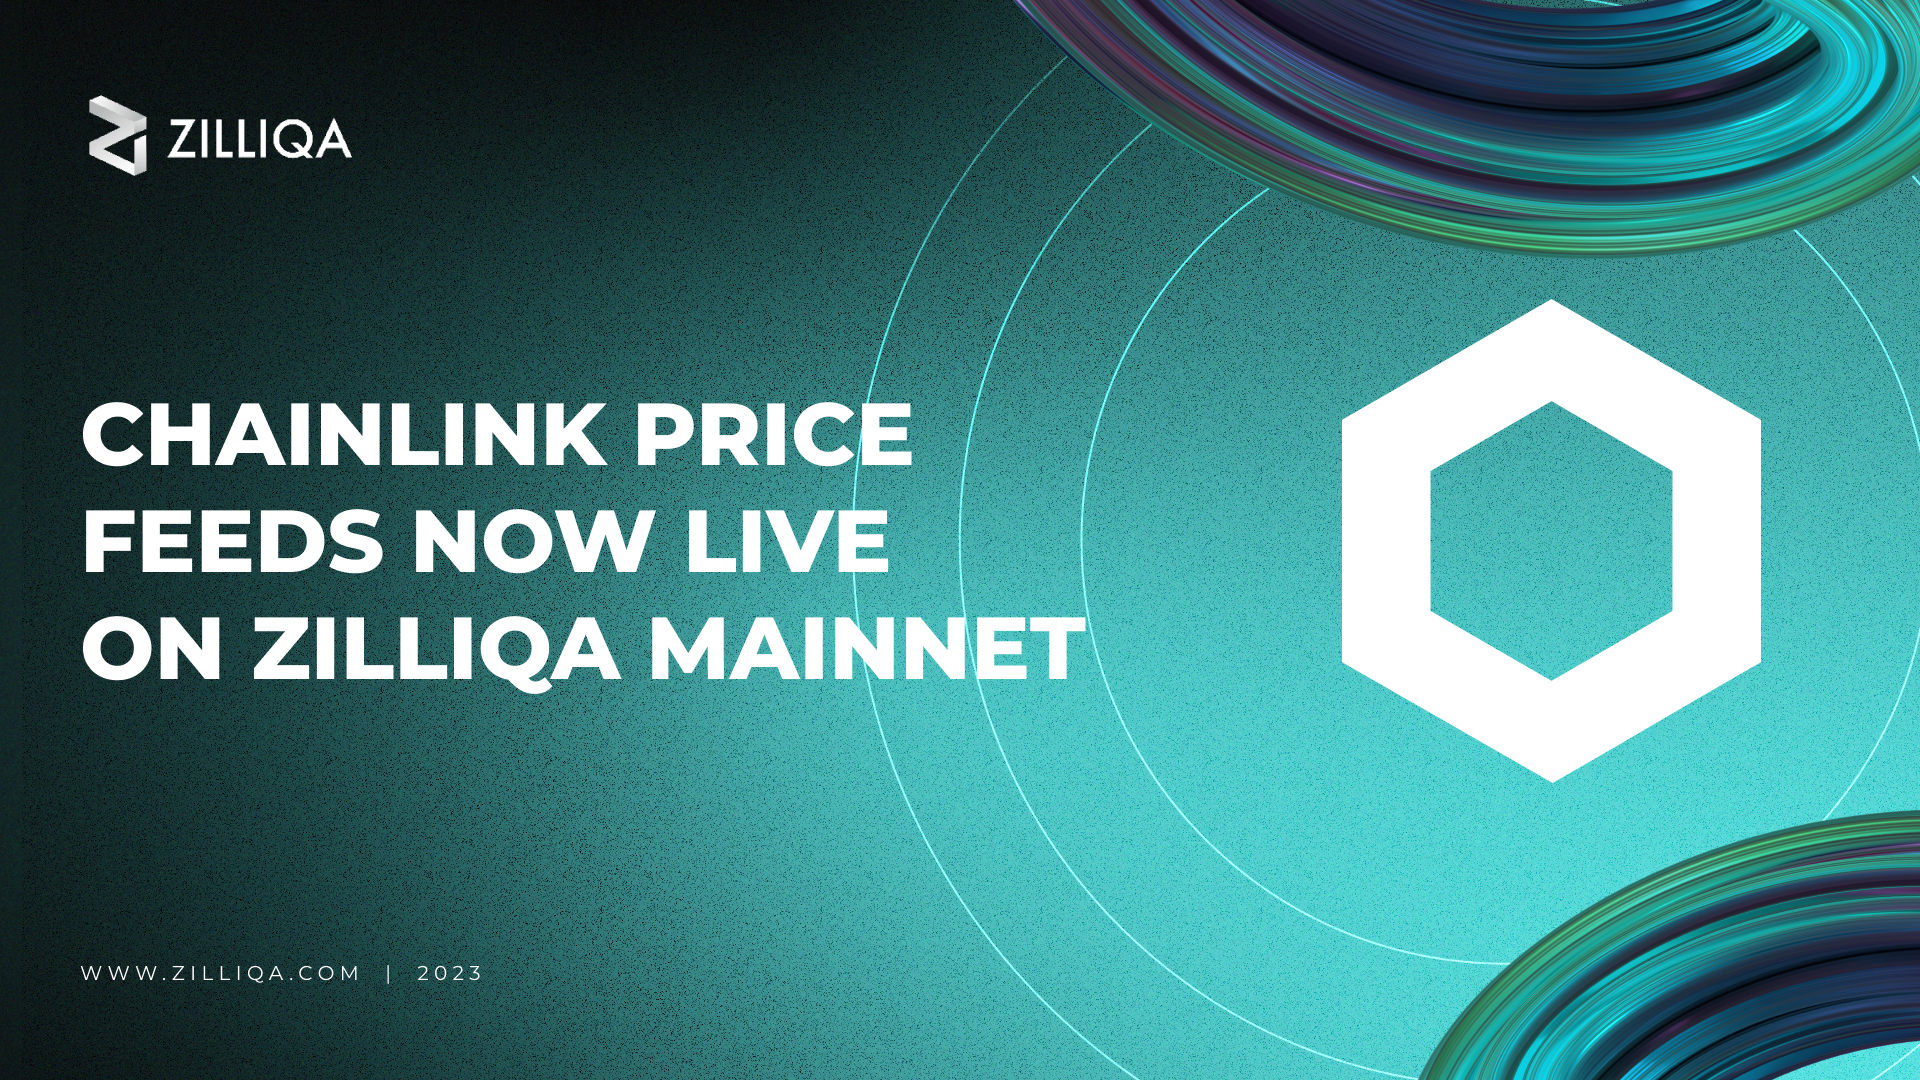 Chainlink price feeds now live on Zilliqa mainnet